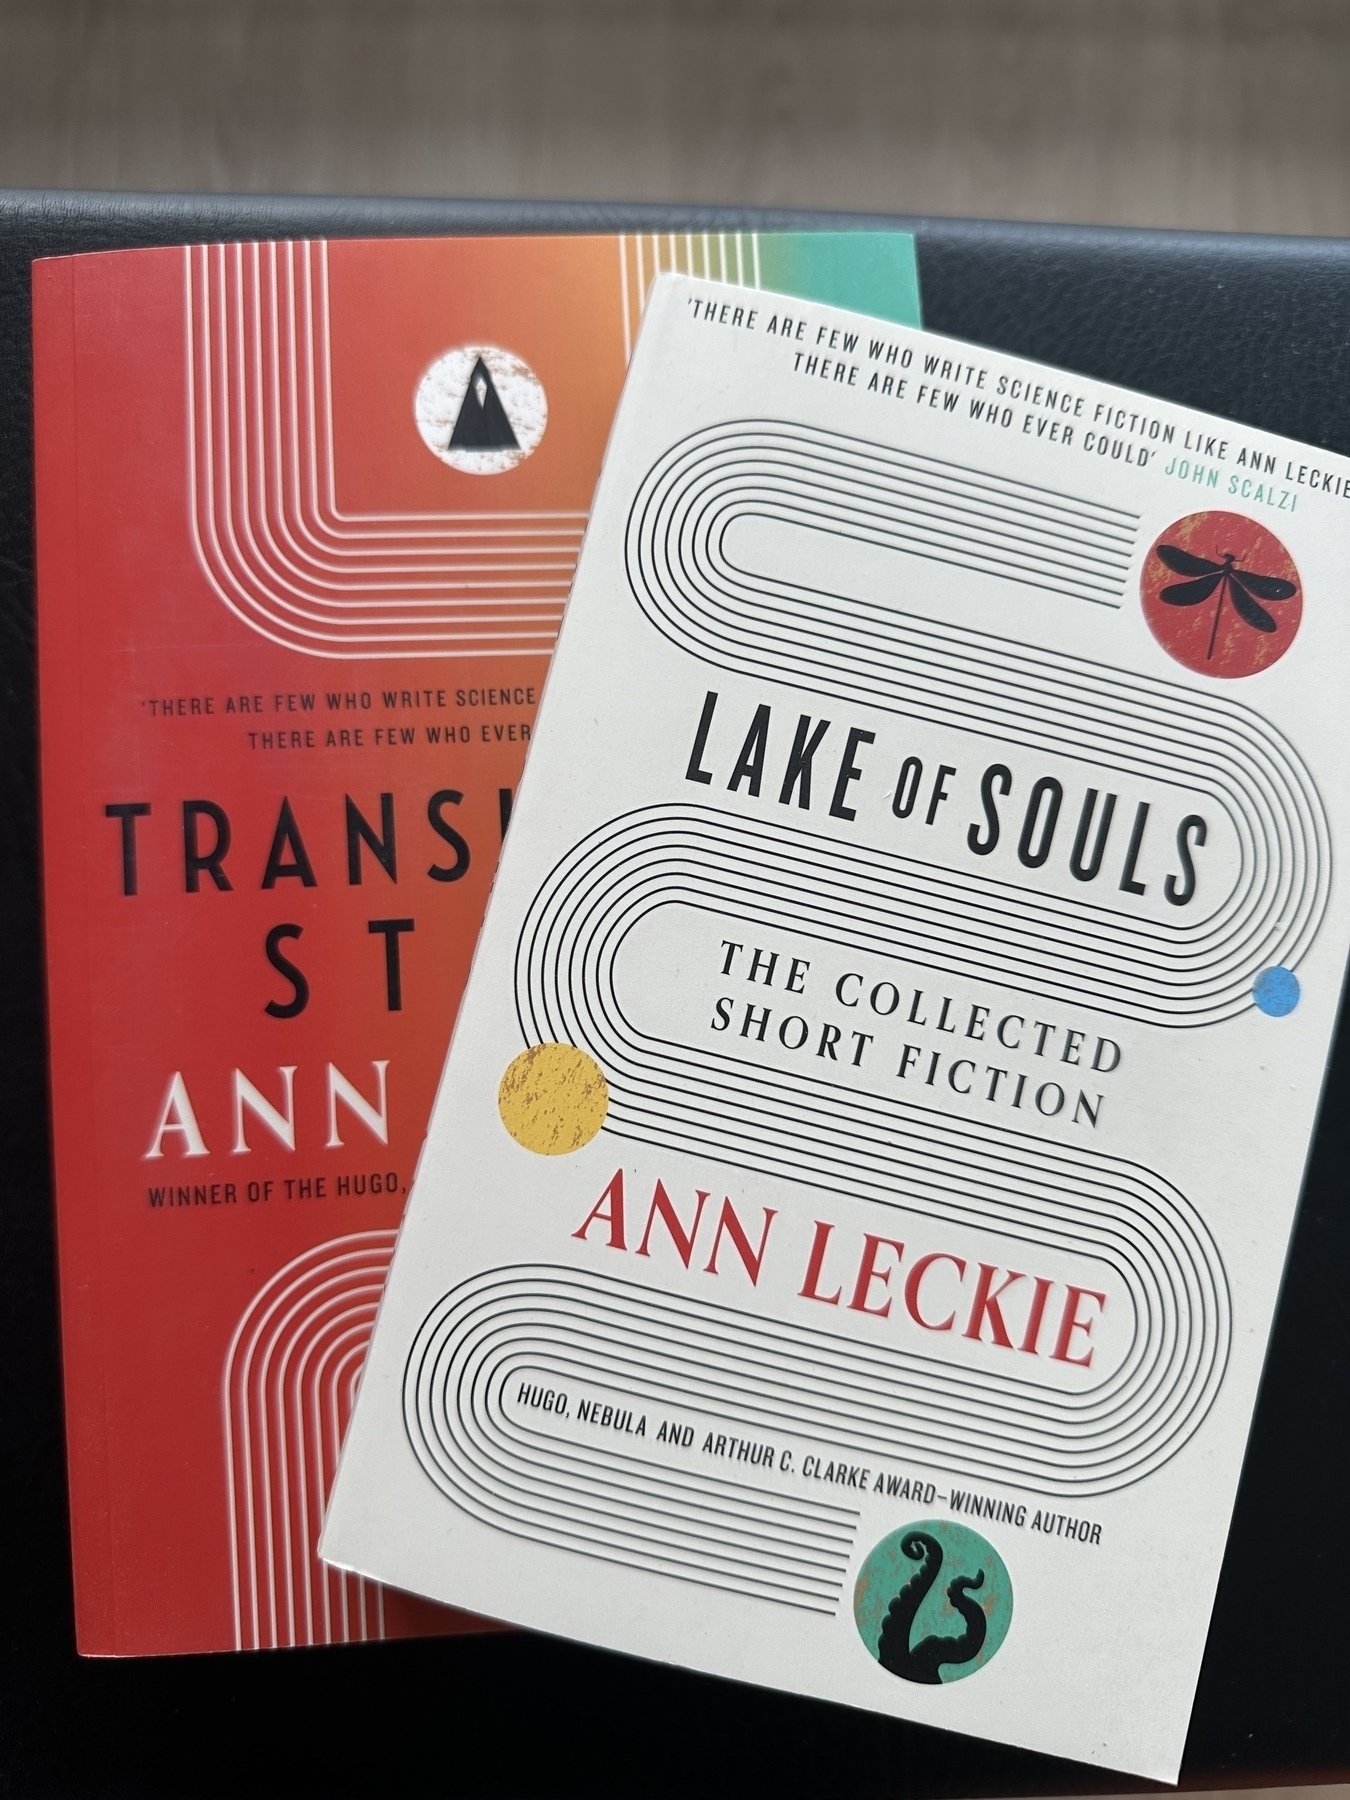 Translation State, Lake of Souls books by Ann Leckie on top of each other on a piano chair